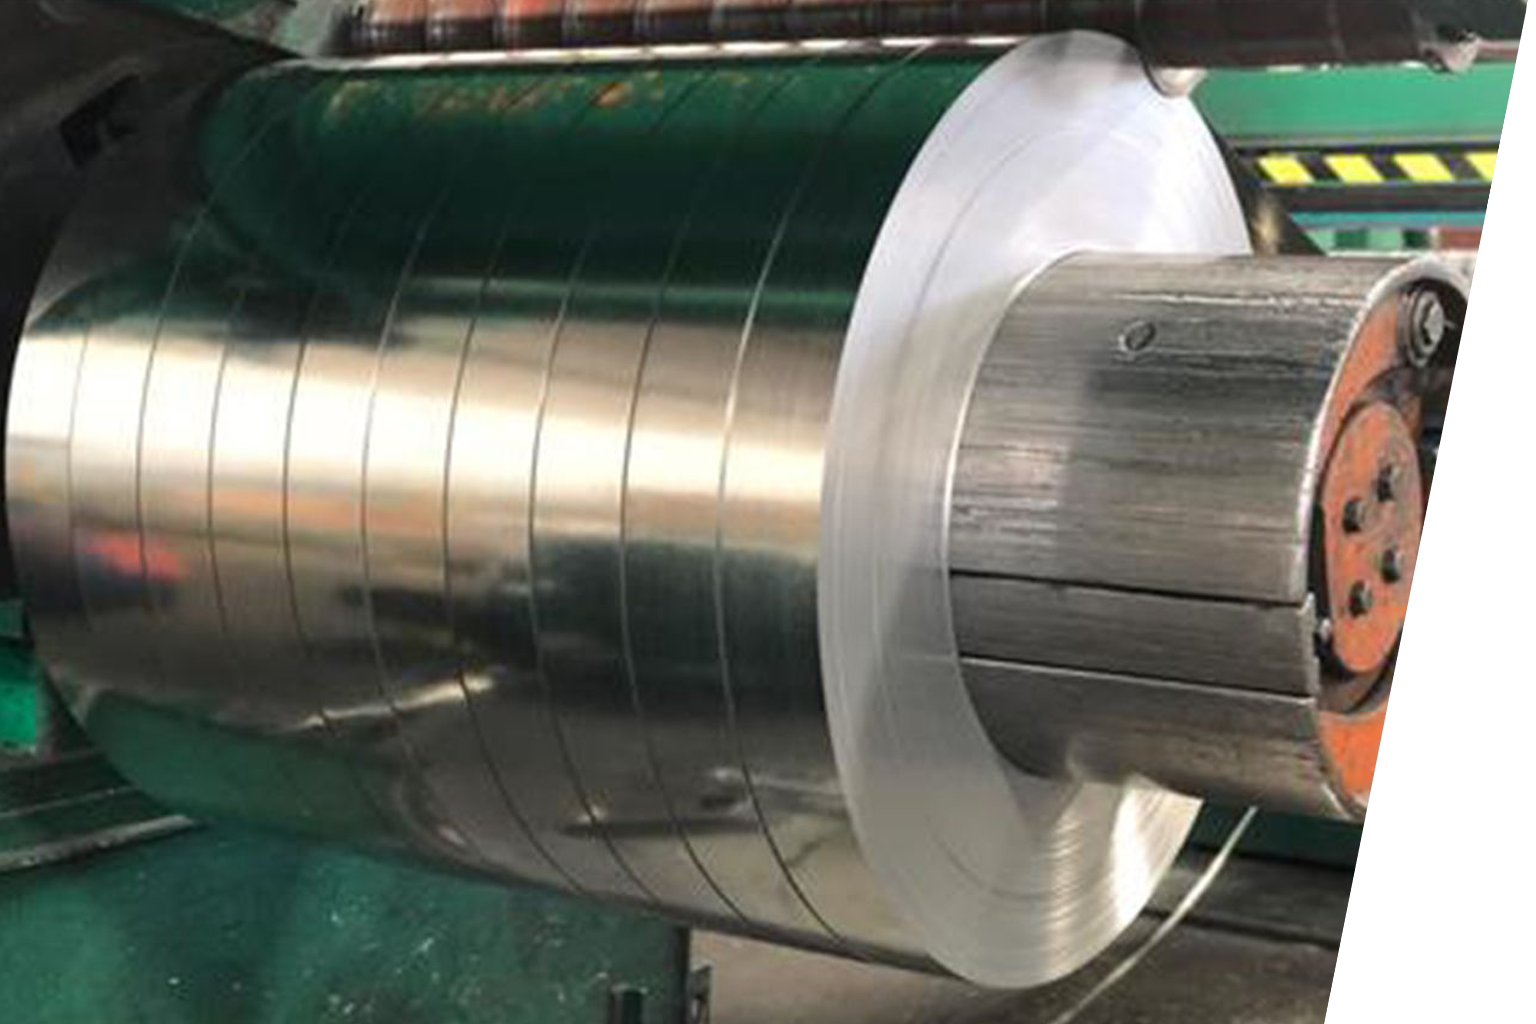 A Roll of Cold Rolled Steel being Slit